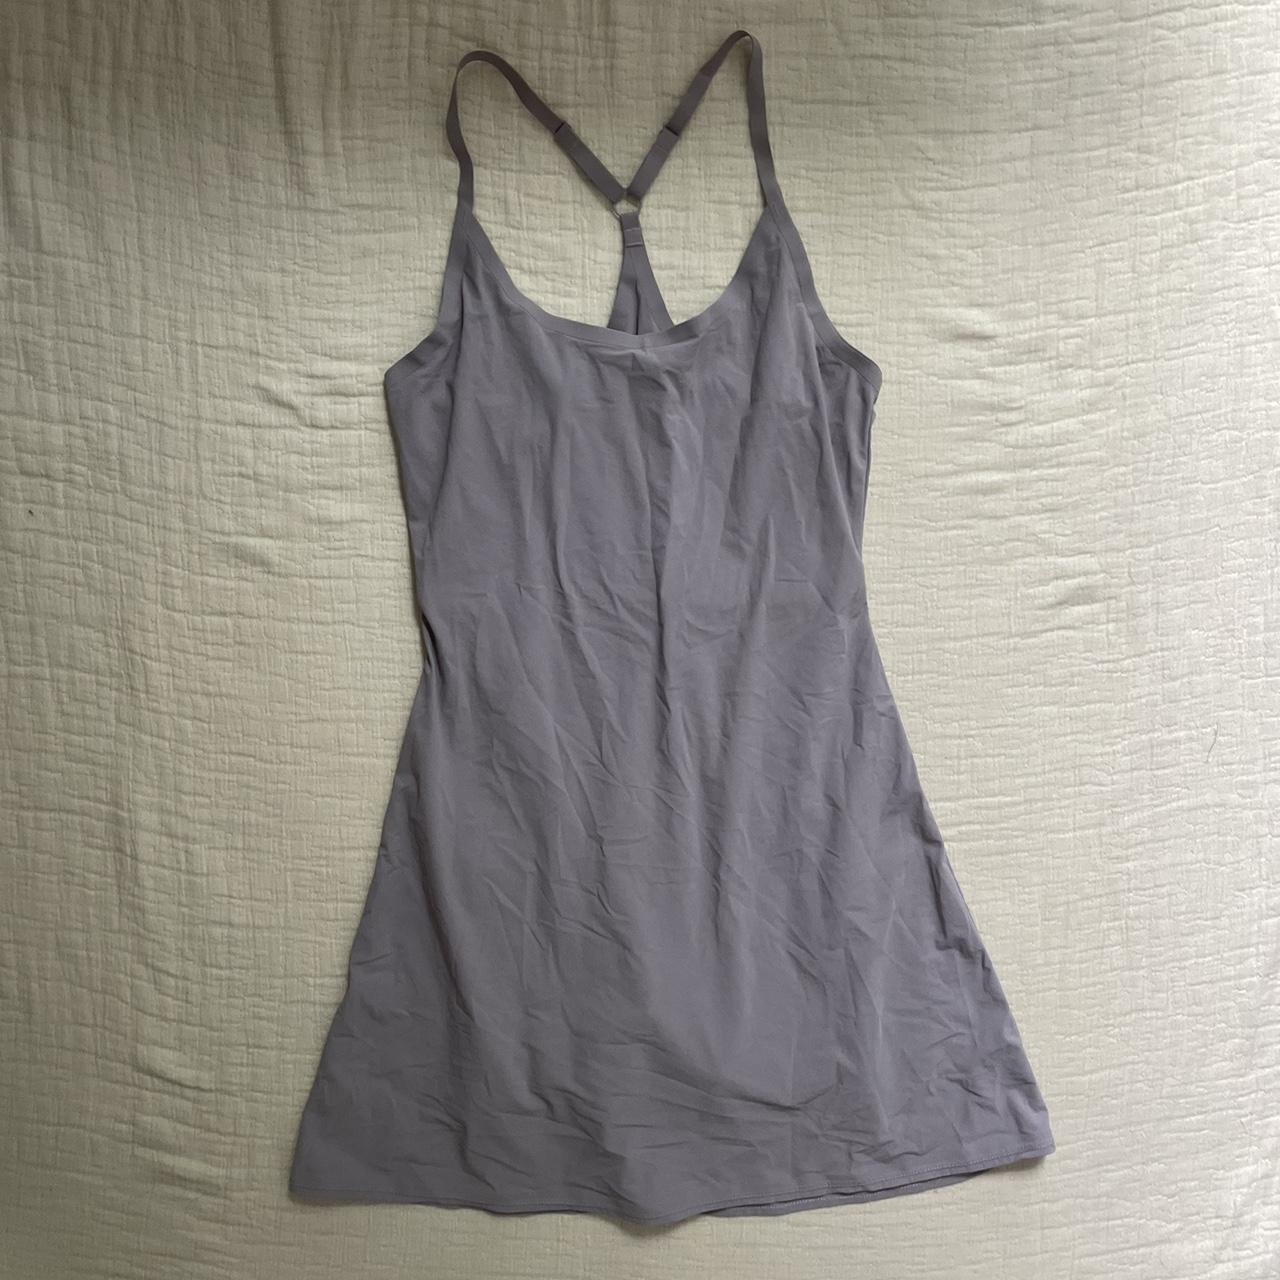 outdoor voices grey exercise dress - Depop